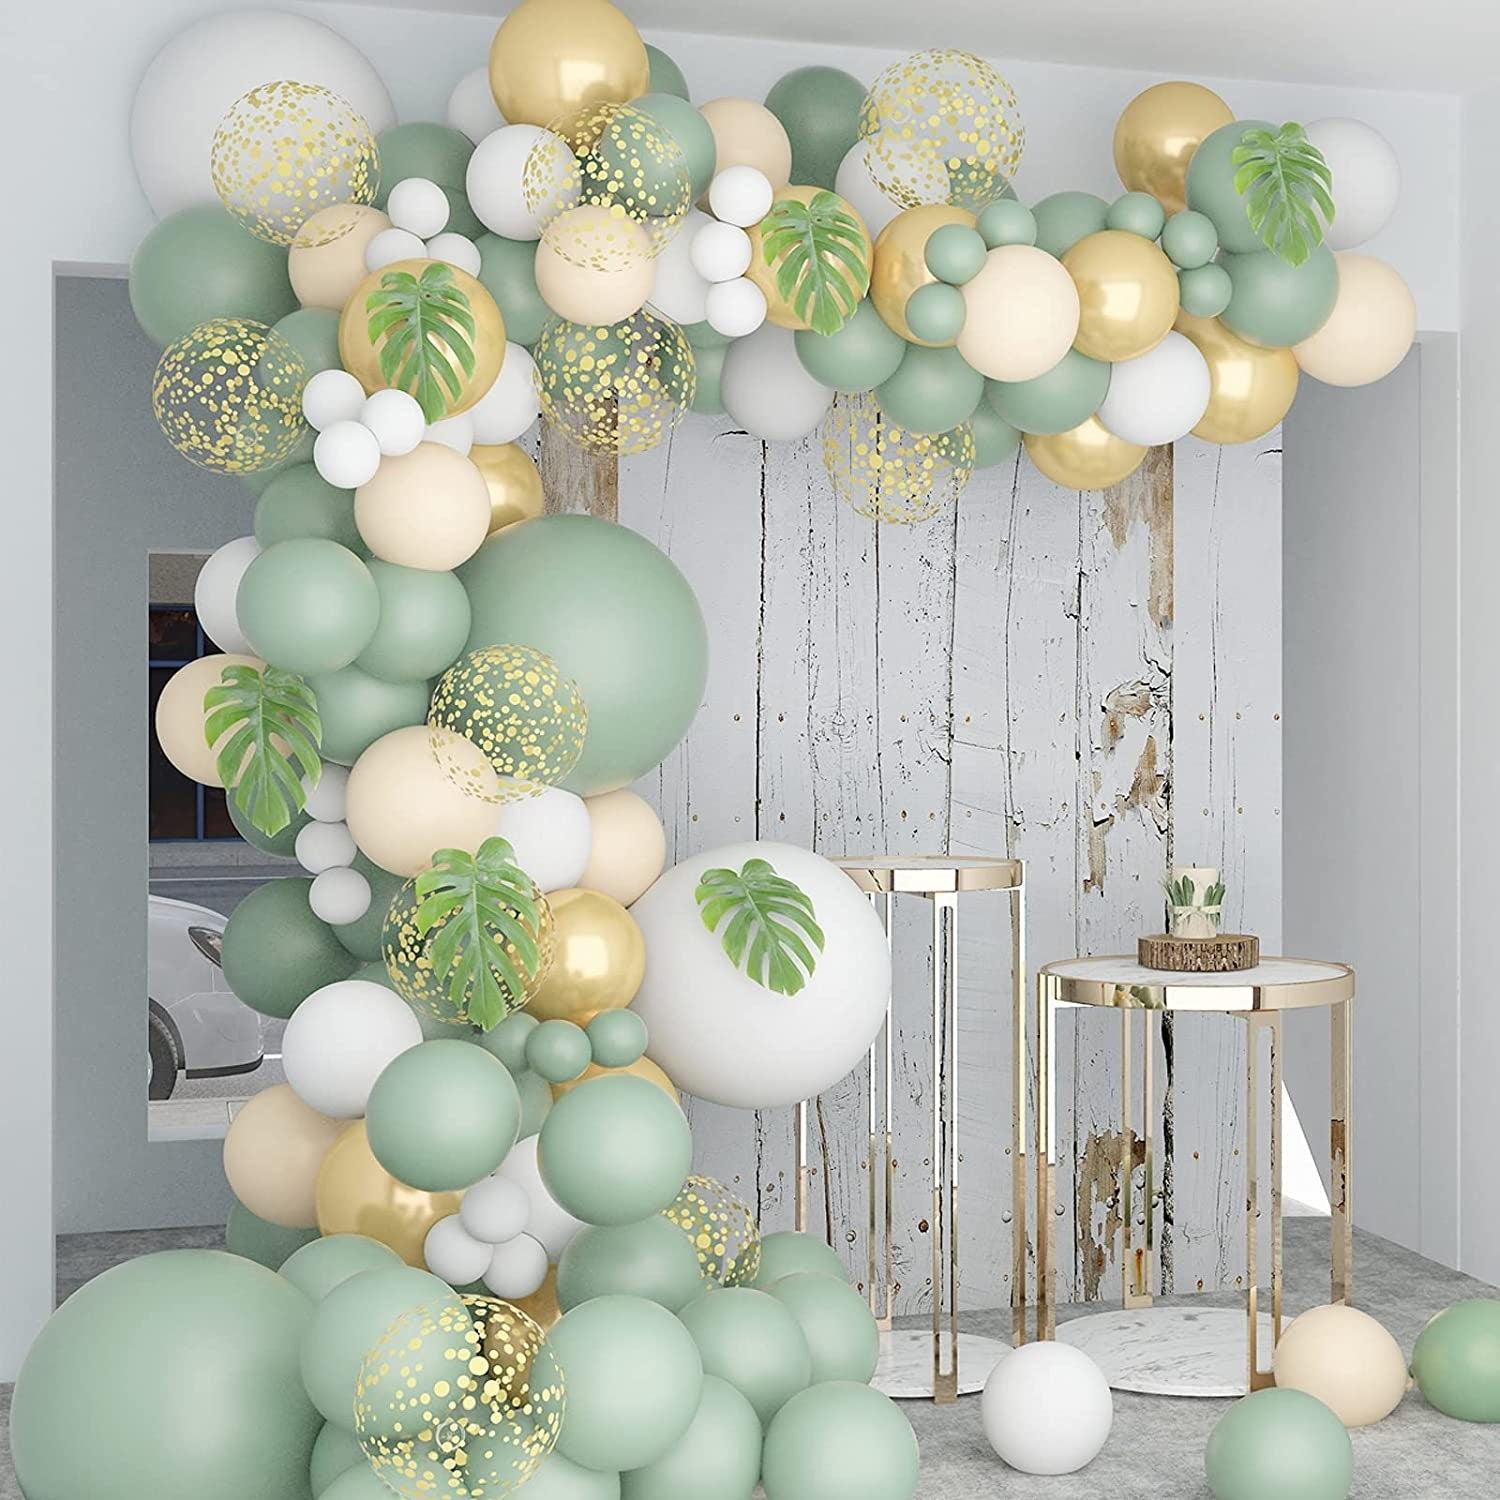 140 Pcs,Sage Green Balloon Garland ,Baby Shower Decorations Olive Green Gold Metallic White Gold Confetti Nude Balloon Arch for Birthday - Lasercutwraps Shop